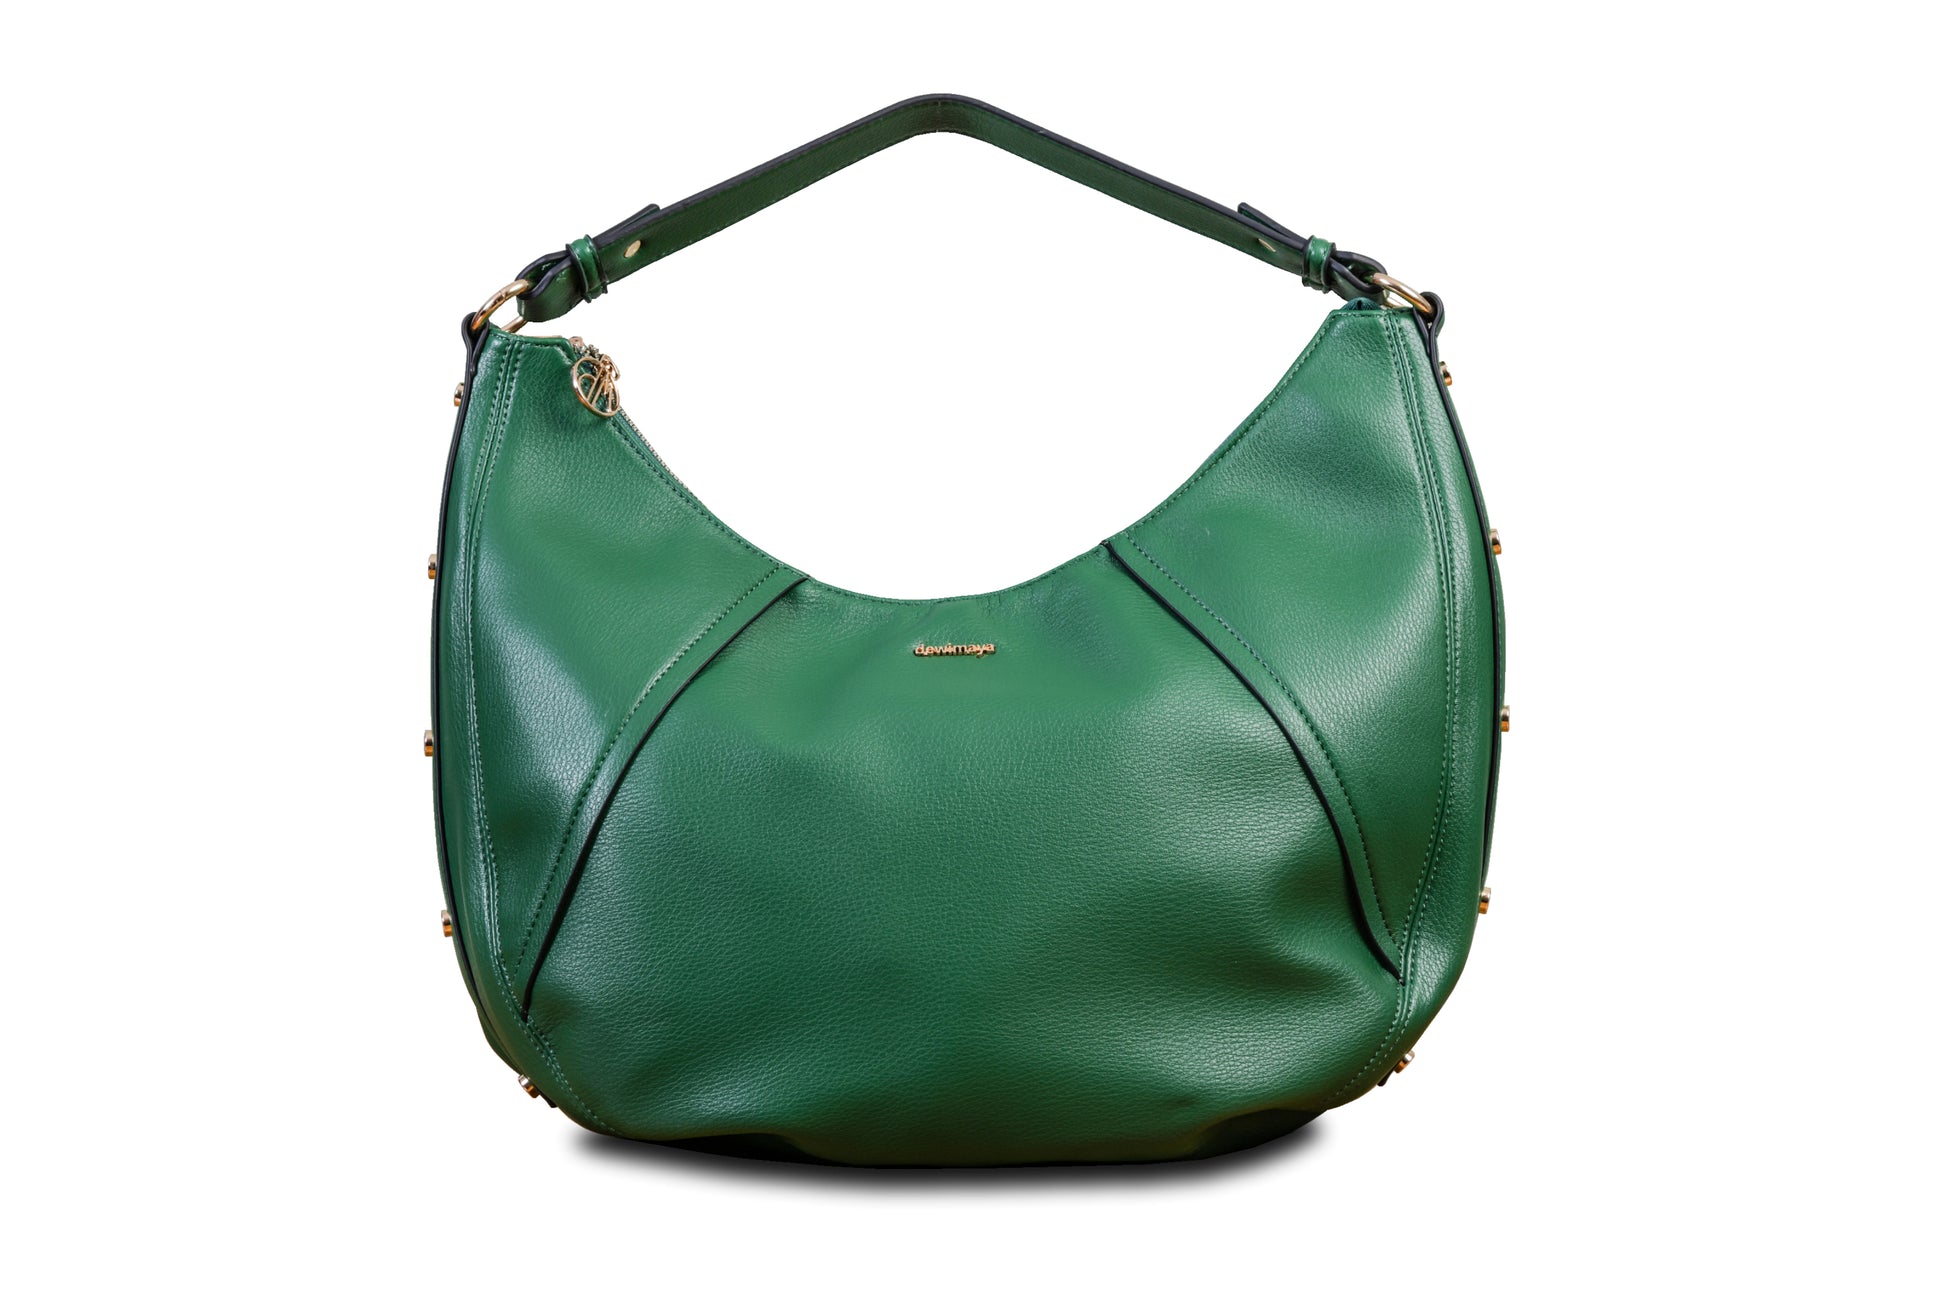 Luna Green Crescent Pebble Grain Faux Leather Handbag made by Dewi Maya front view available at the best boutique in Upstate South Carolina Spartanburg Greenville Dewi Maya Boutique